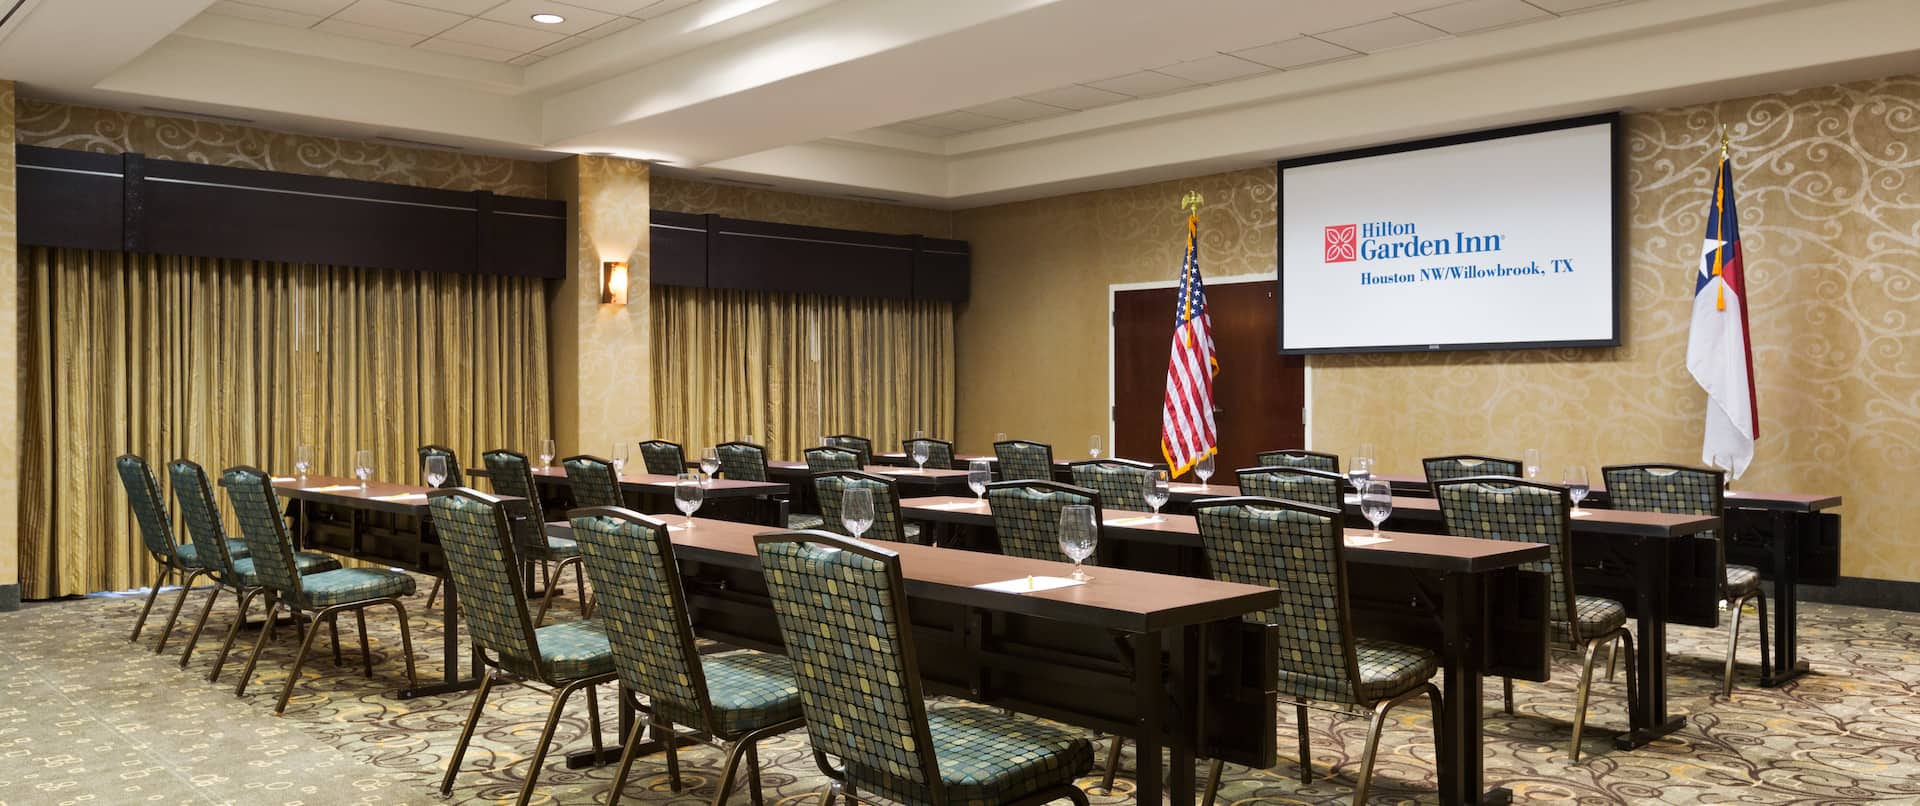 Classroom Style Meeting Room With Tables and Chairs Facing Presentation Screen  Between American and Texan Flags